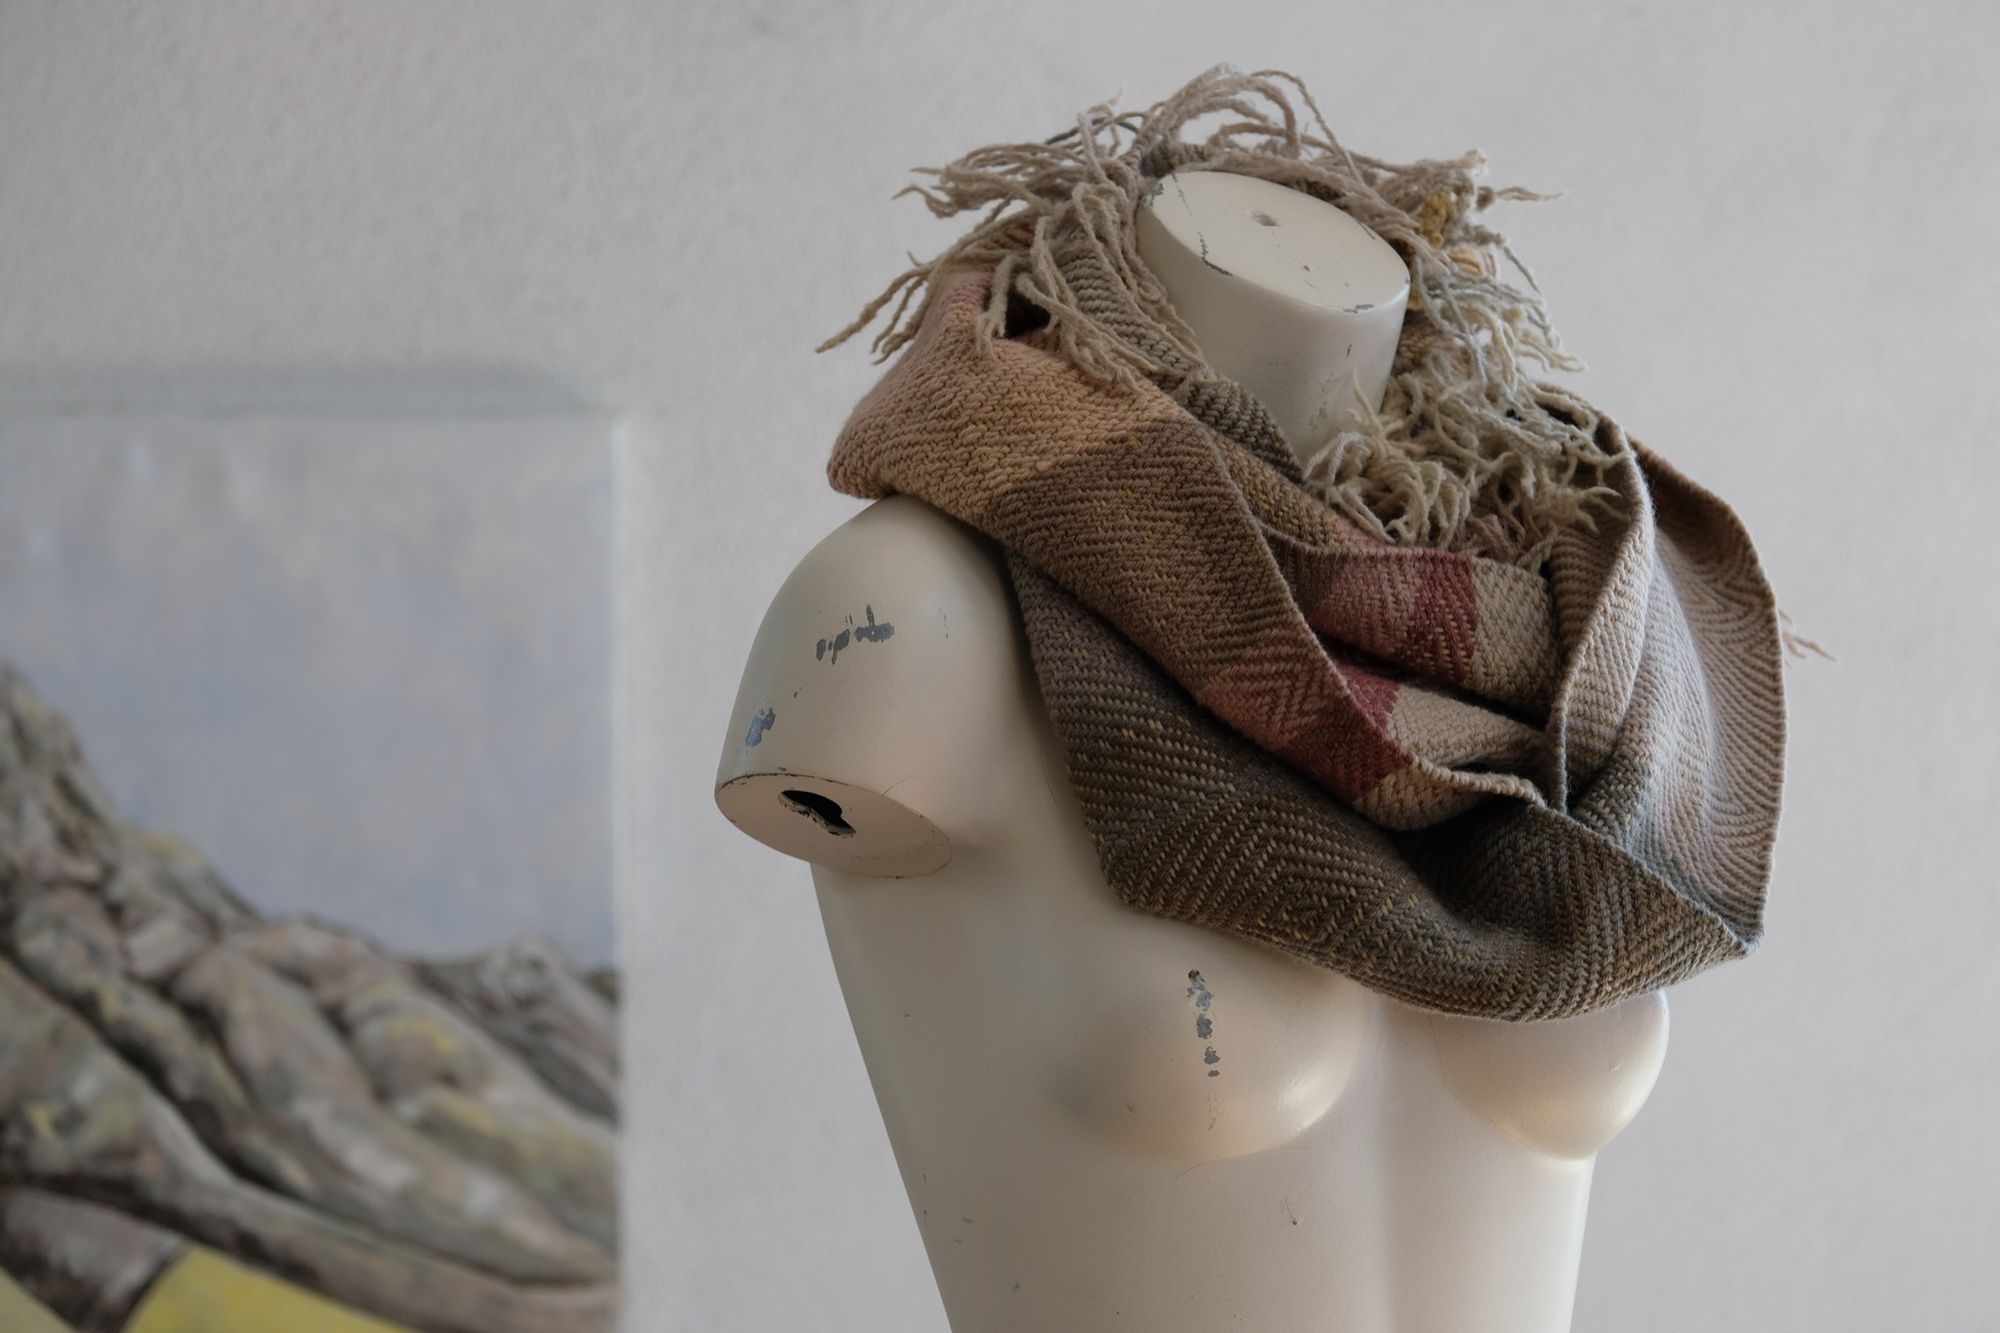 A white painted mannequin torso wears a handwoven naturally dyed highly textured and fringed loop scarf in soft shades of pink, grey, yellow and tan